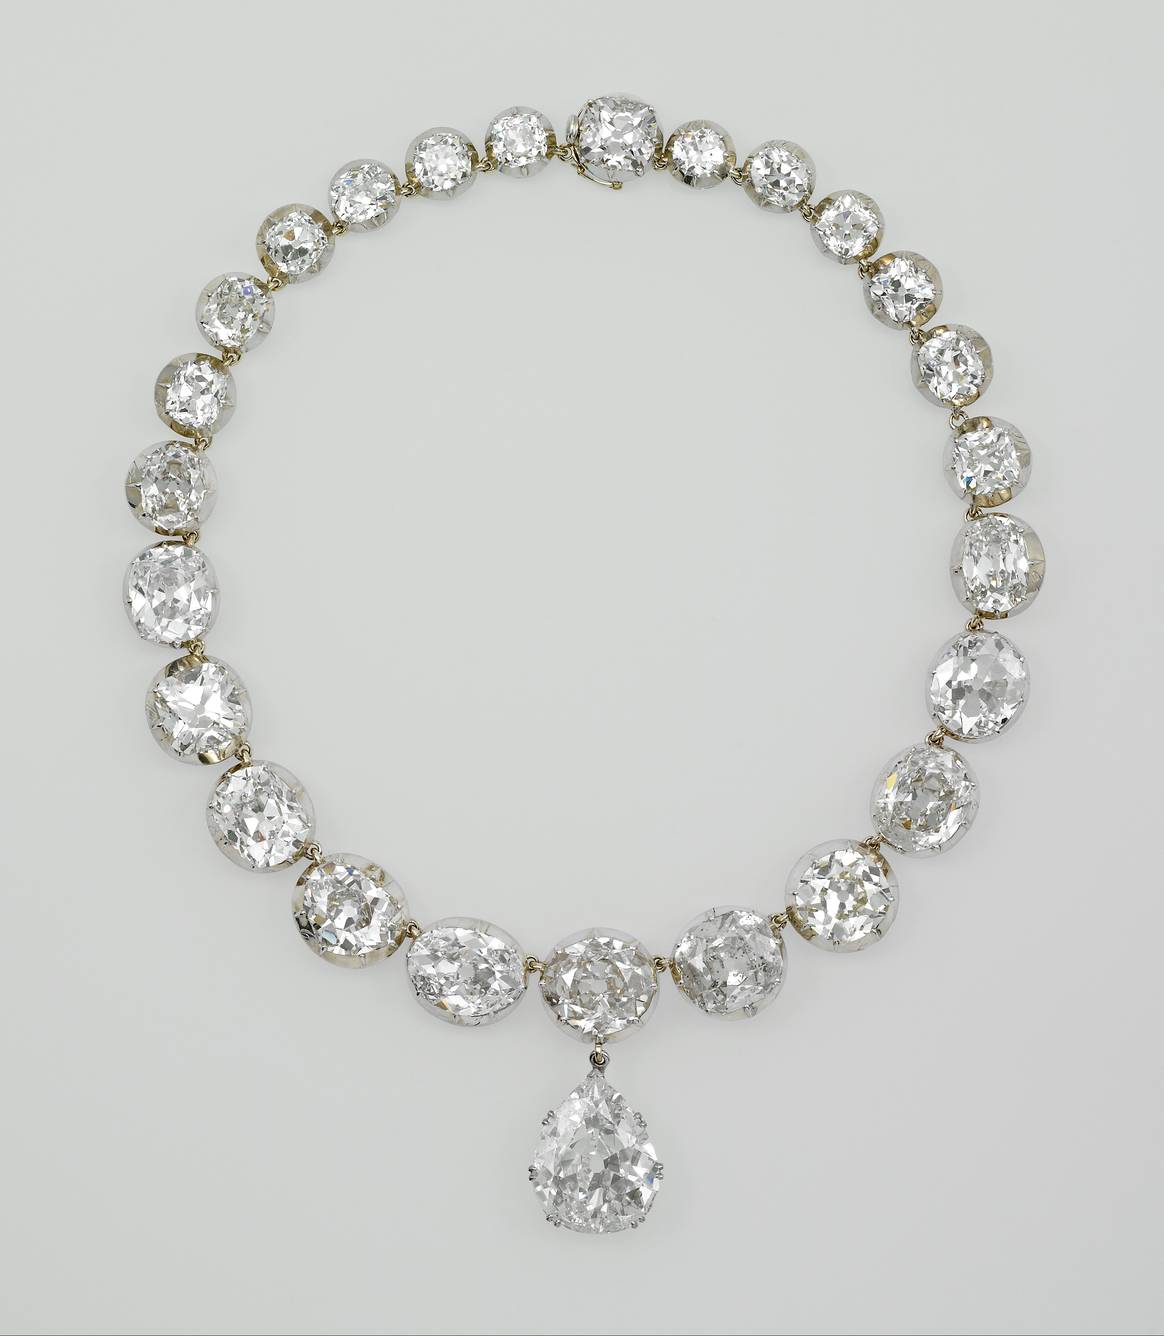 Image: Royal Collection Trust; R. & S. Garrard & Co., The Coronation  Necklace, 1858